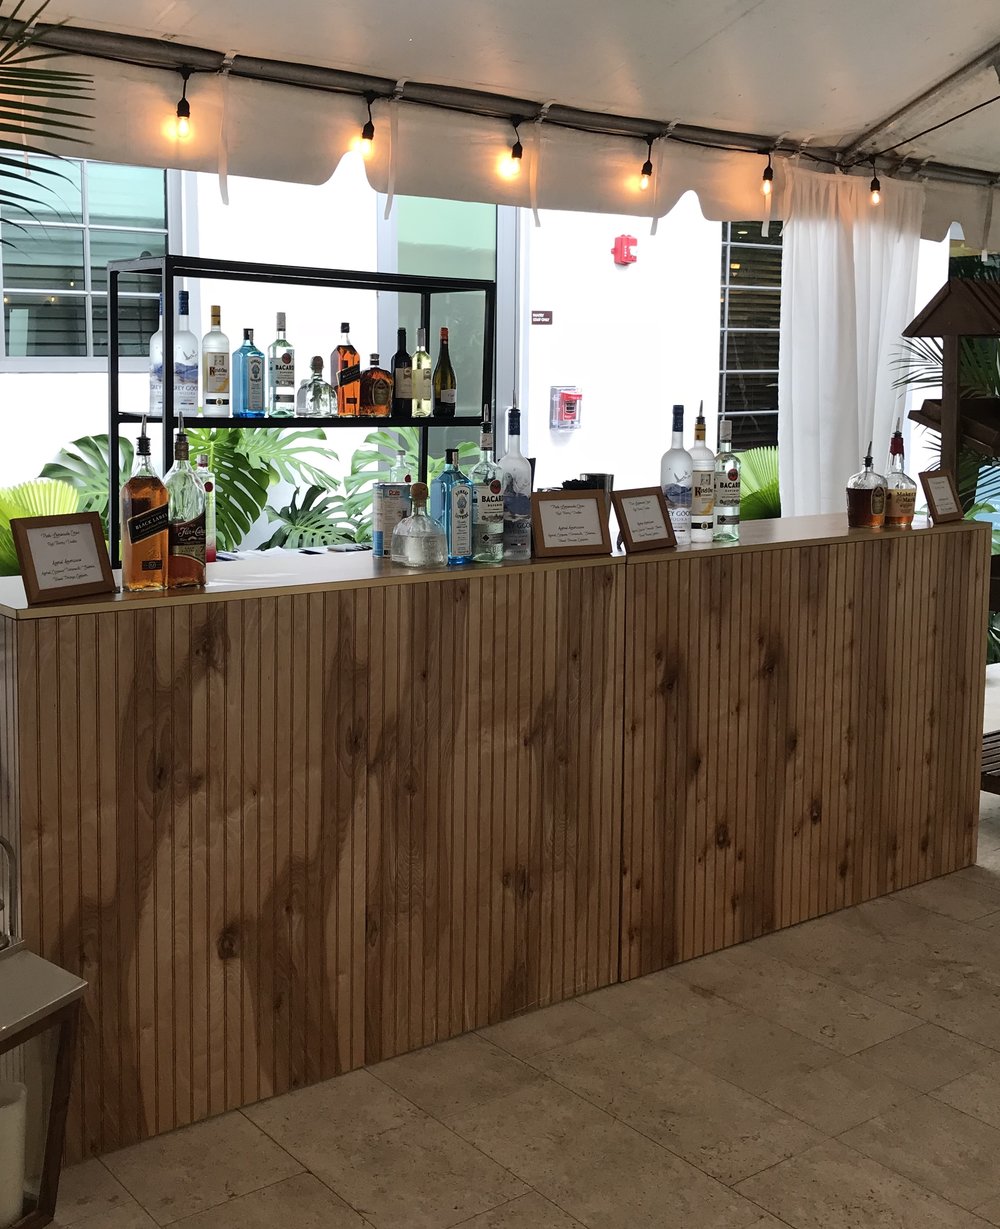 Rustic Wood Pallet Bar - Prime Time Party and Event Rental